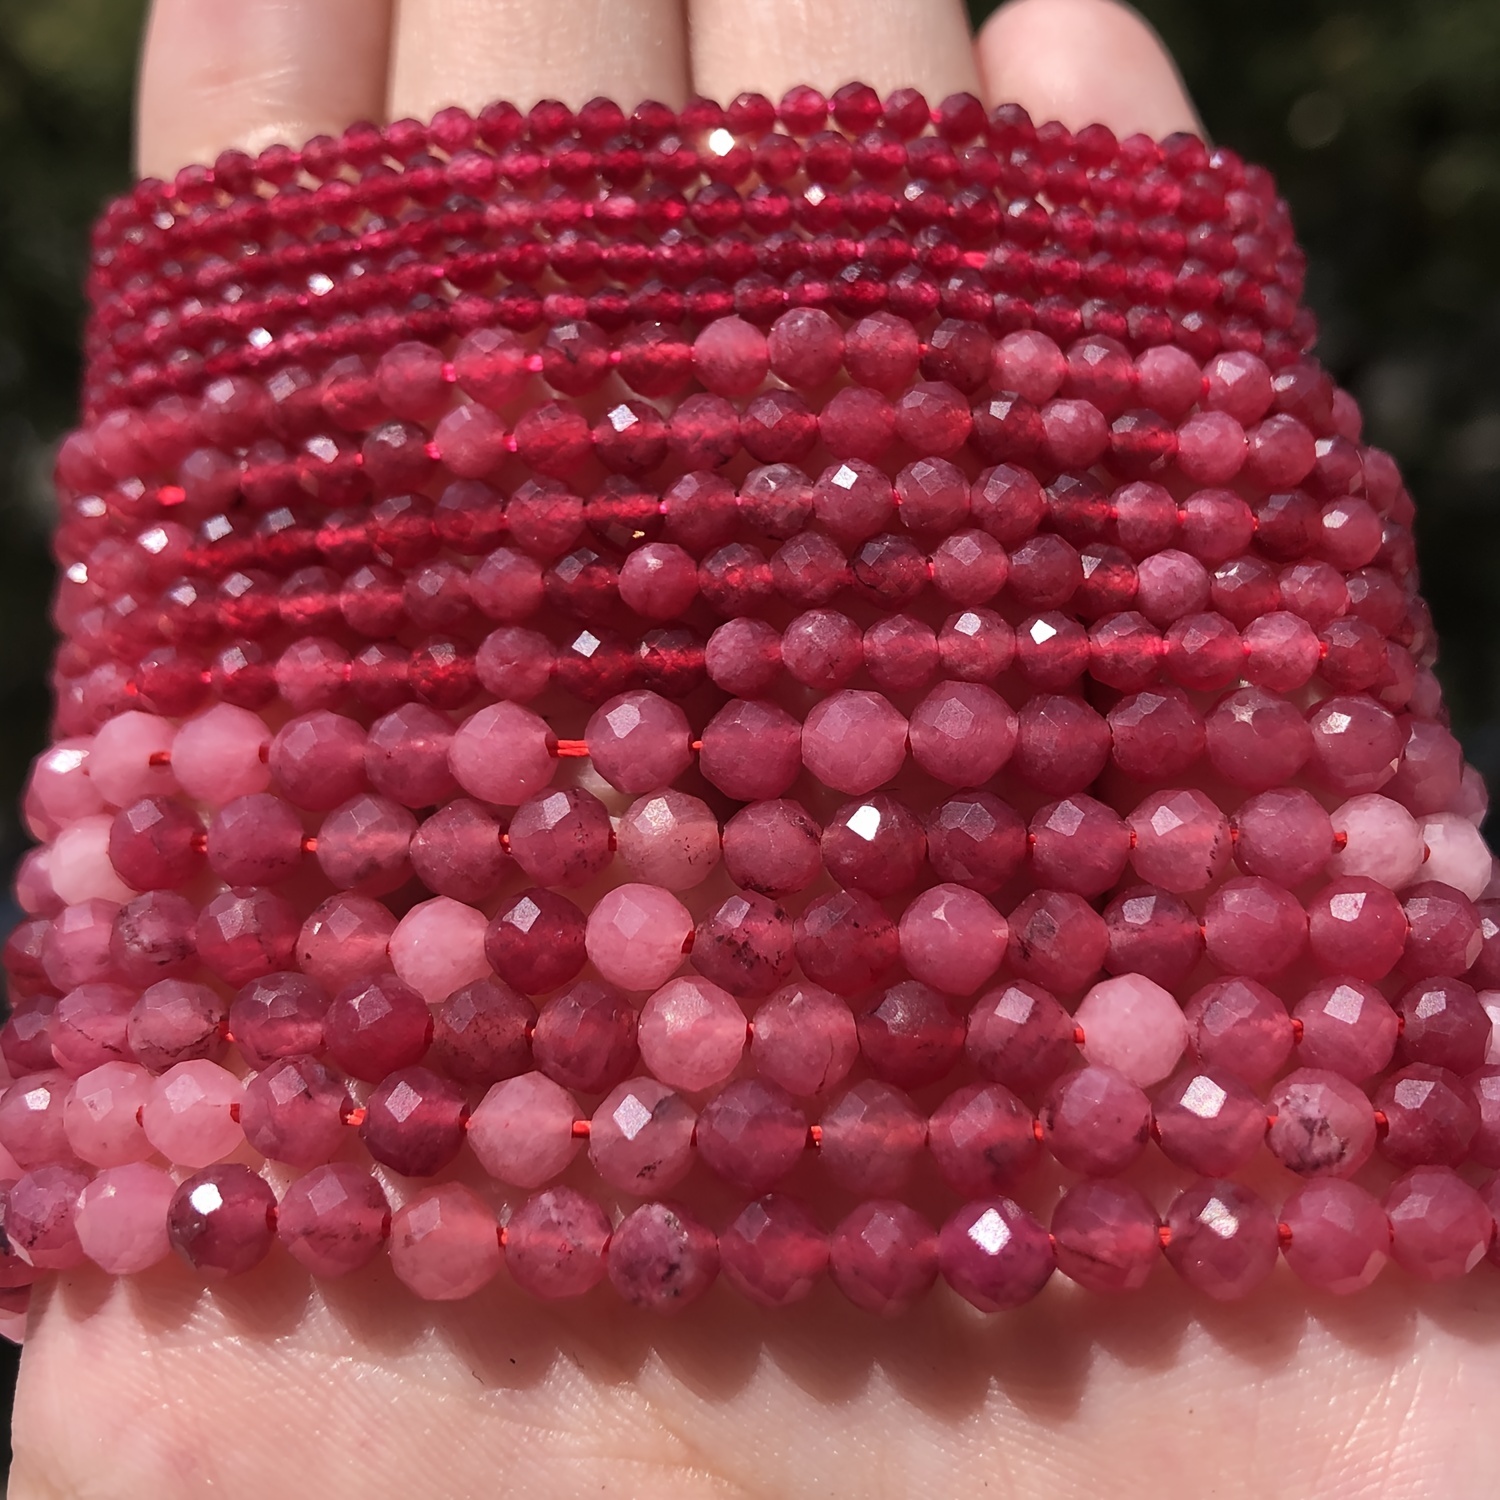 2/3/4mm Faux Rubys Stone Beads Red Crystal Round Loose Spacer Waist Beads  For Jewelry Making DIY Bracelet Supplies